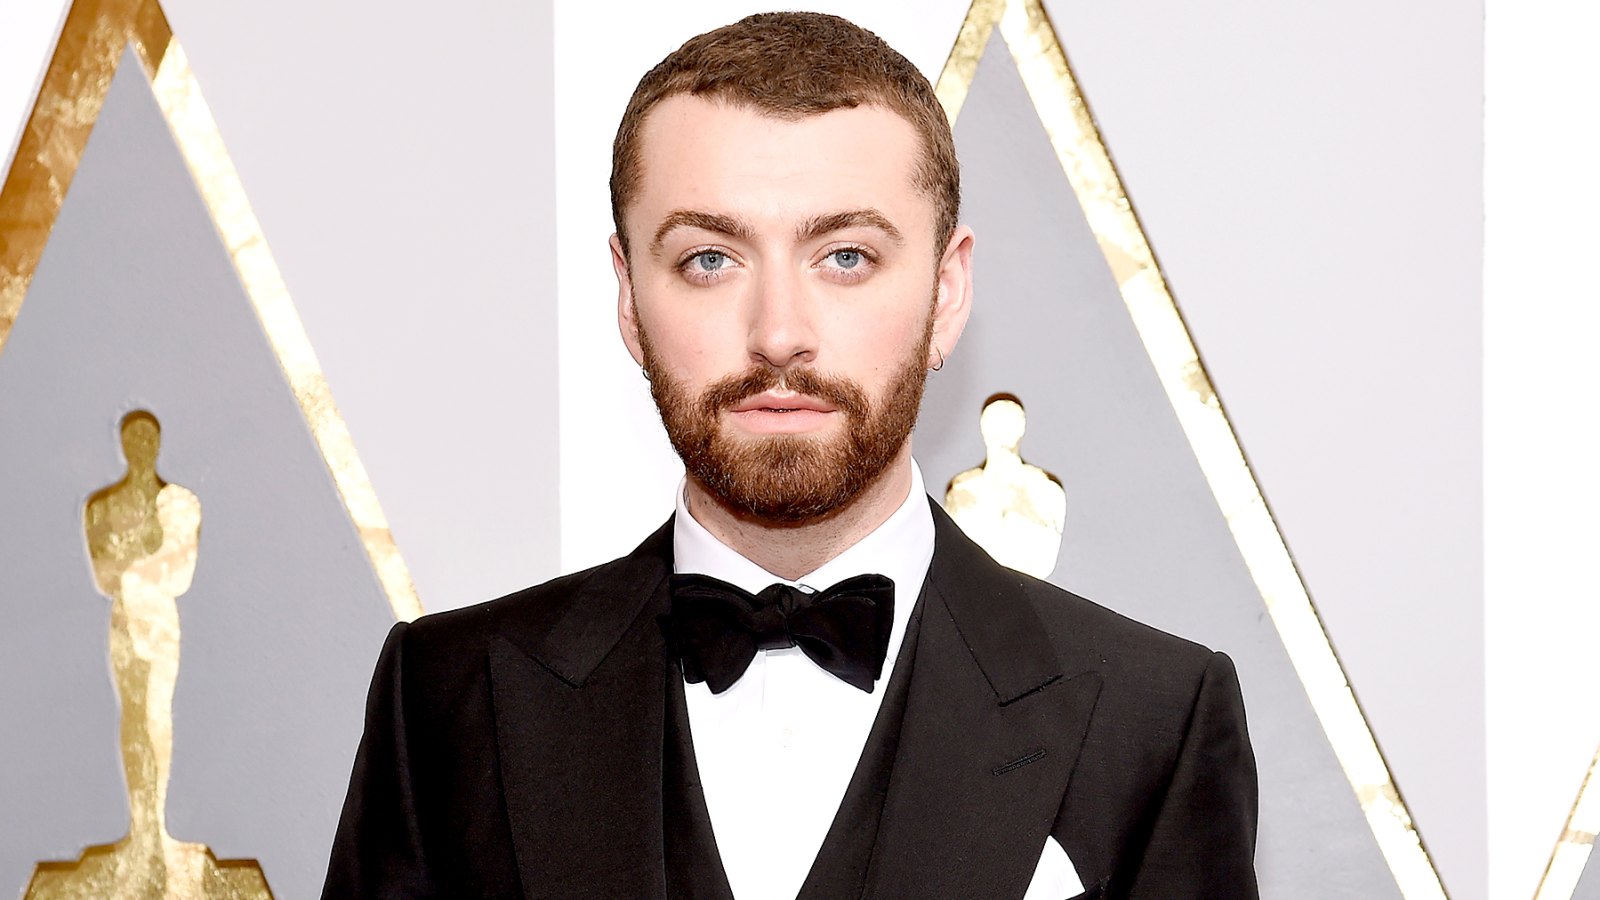 Sam Smith attends the 88th Annual Academy Awards.